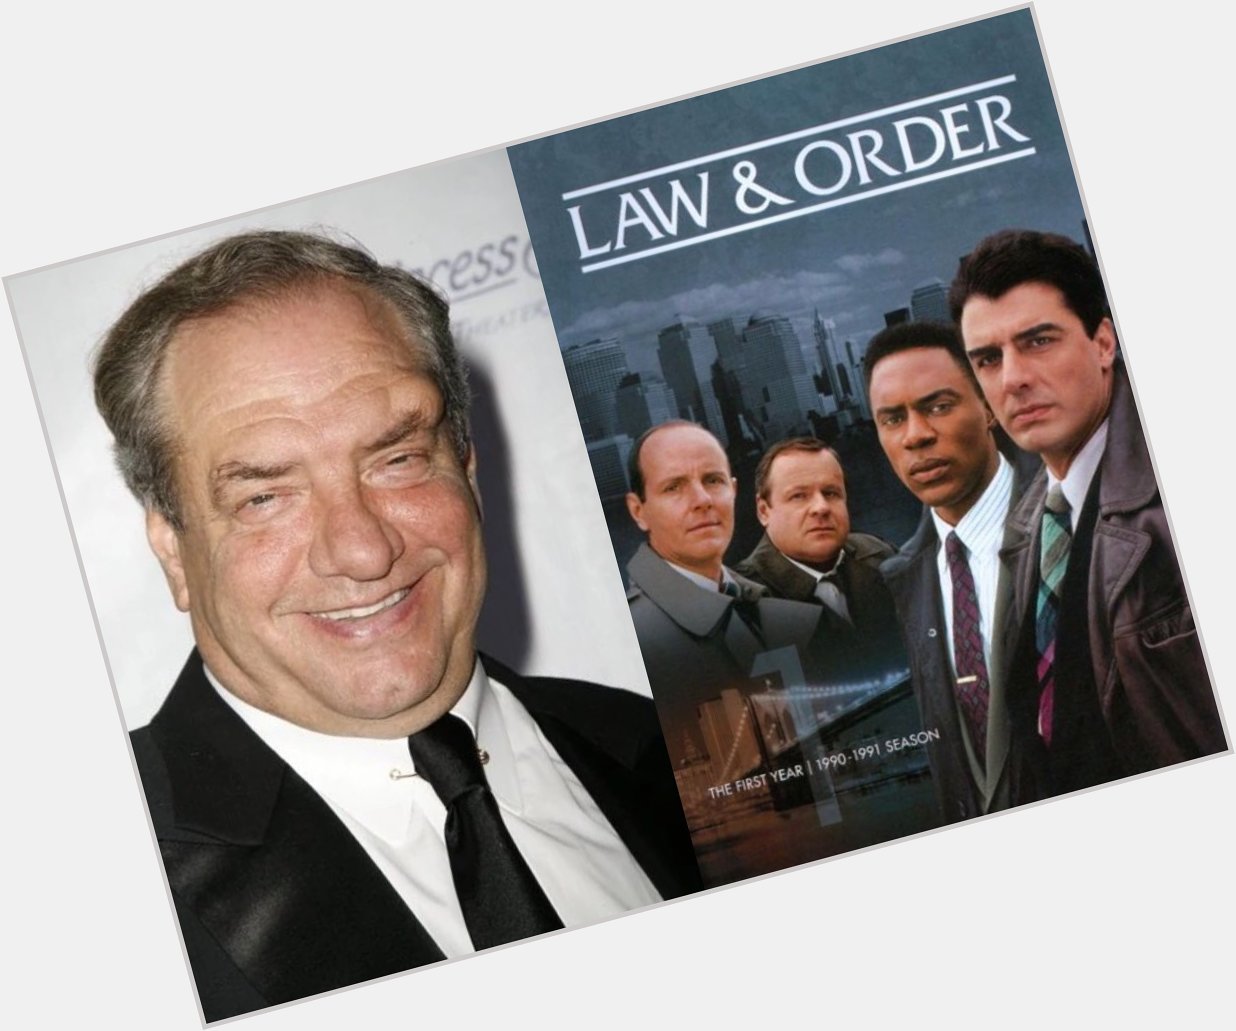 Happy 75th Birthday to Dick Wolf! The creator of the Law & Order franchise. 